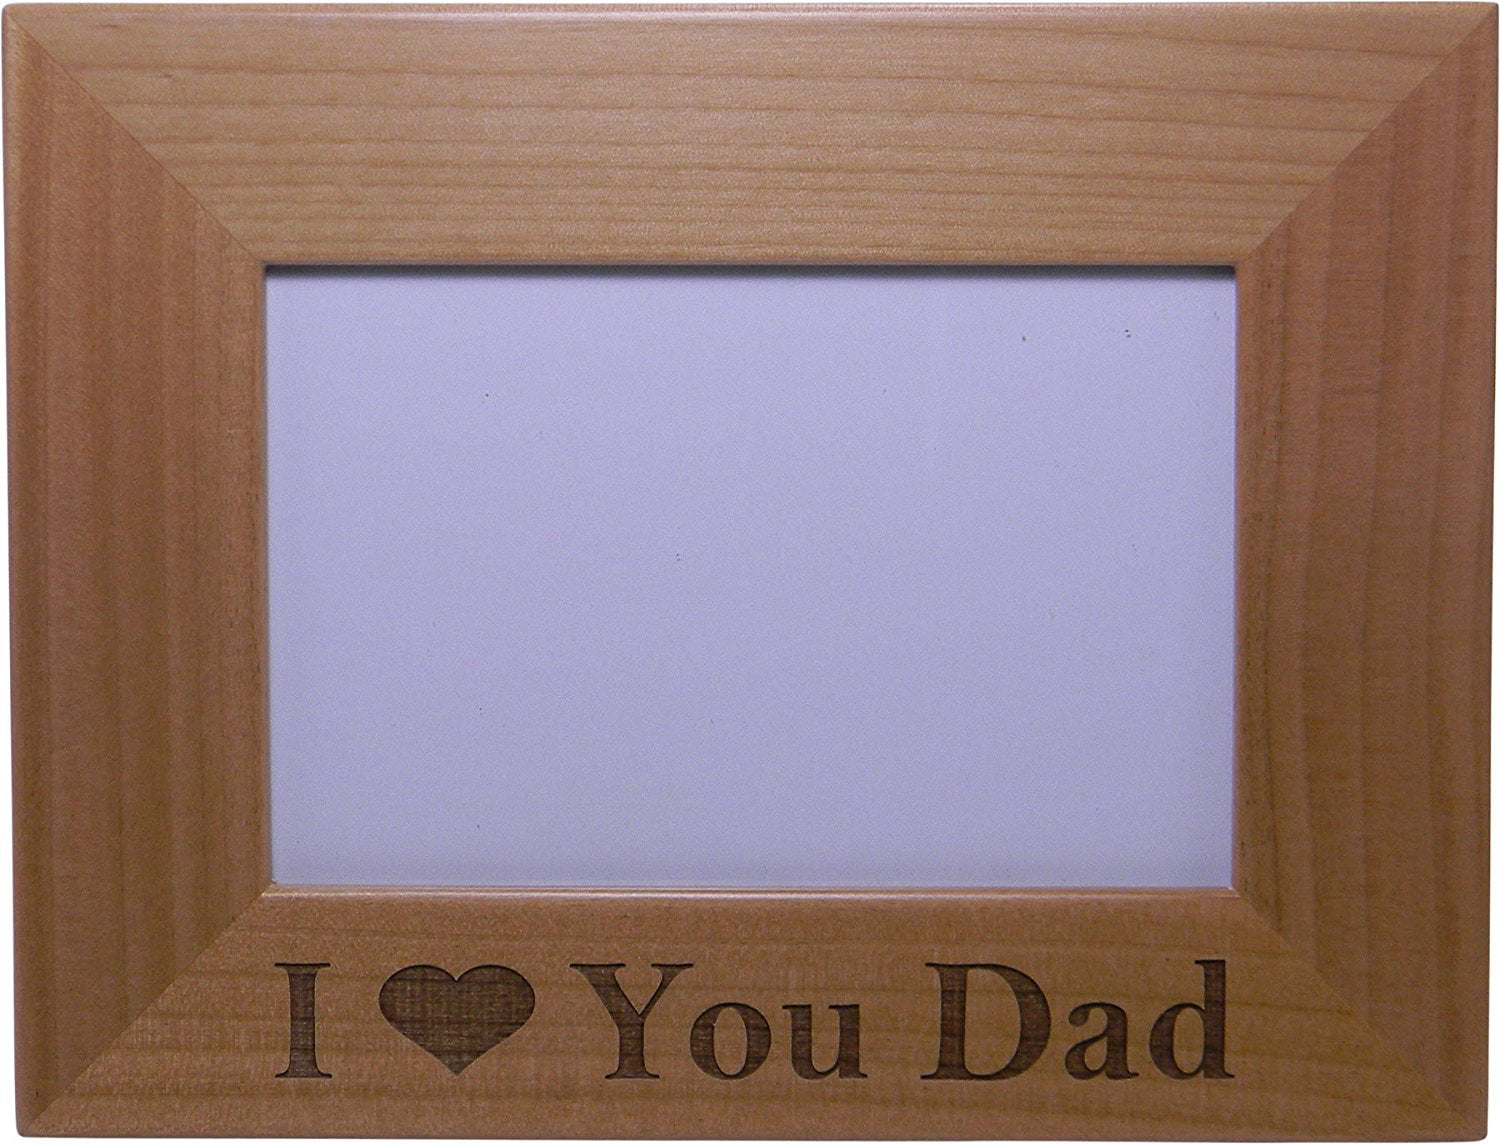 4x6 Inch Wood Picture Frame Great Gift for Father's Day Birthday Christmas Gift for Dad Husband Only thing better than having you as my husband is our children having you as their dad